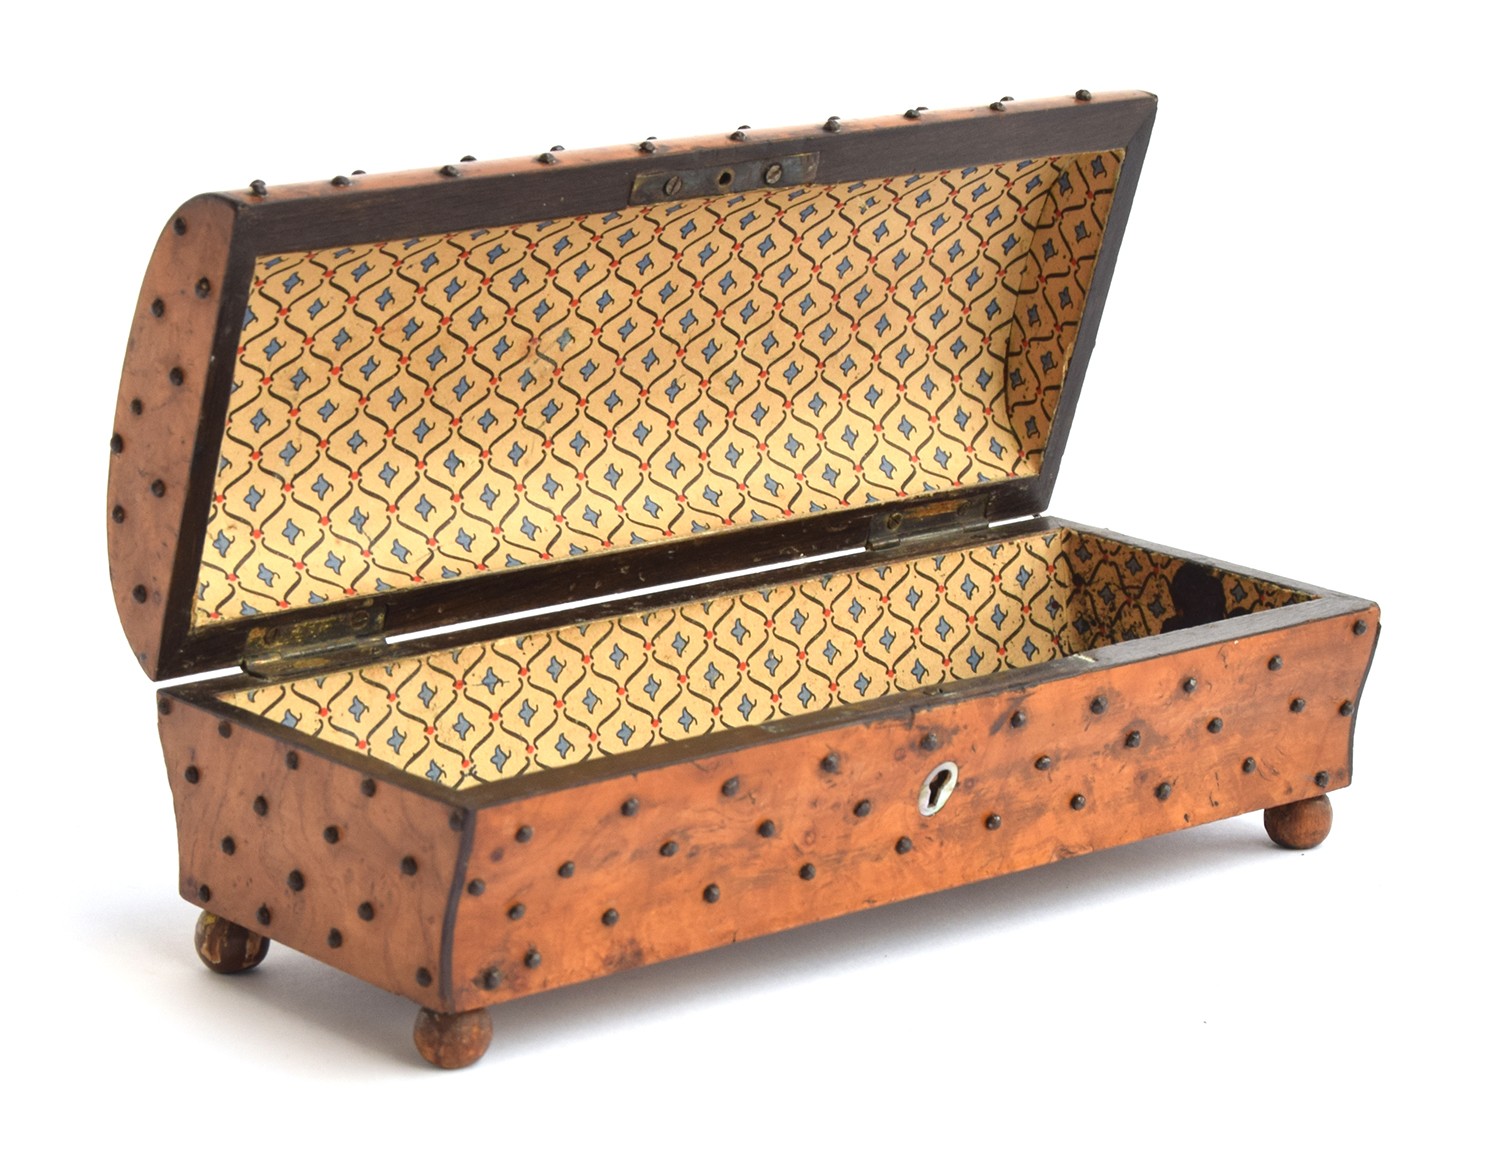 A 19th century burr walnut trinket box, profusely studded with steel pins, mother of pearl inlay - Image 2 of 2